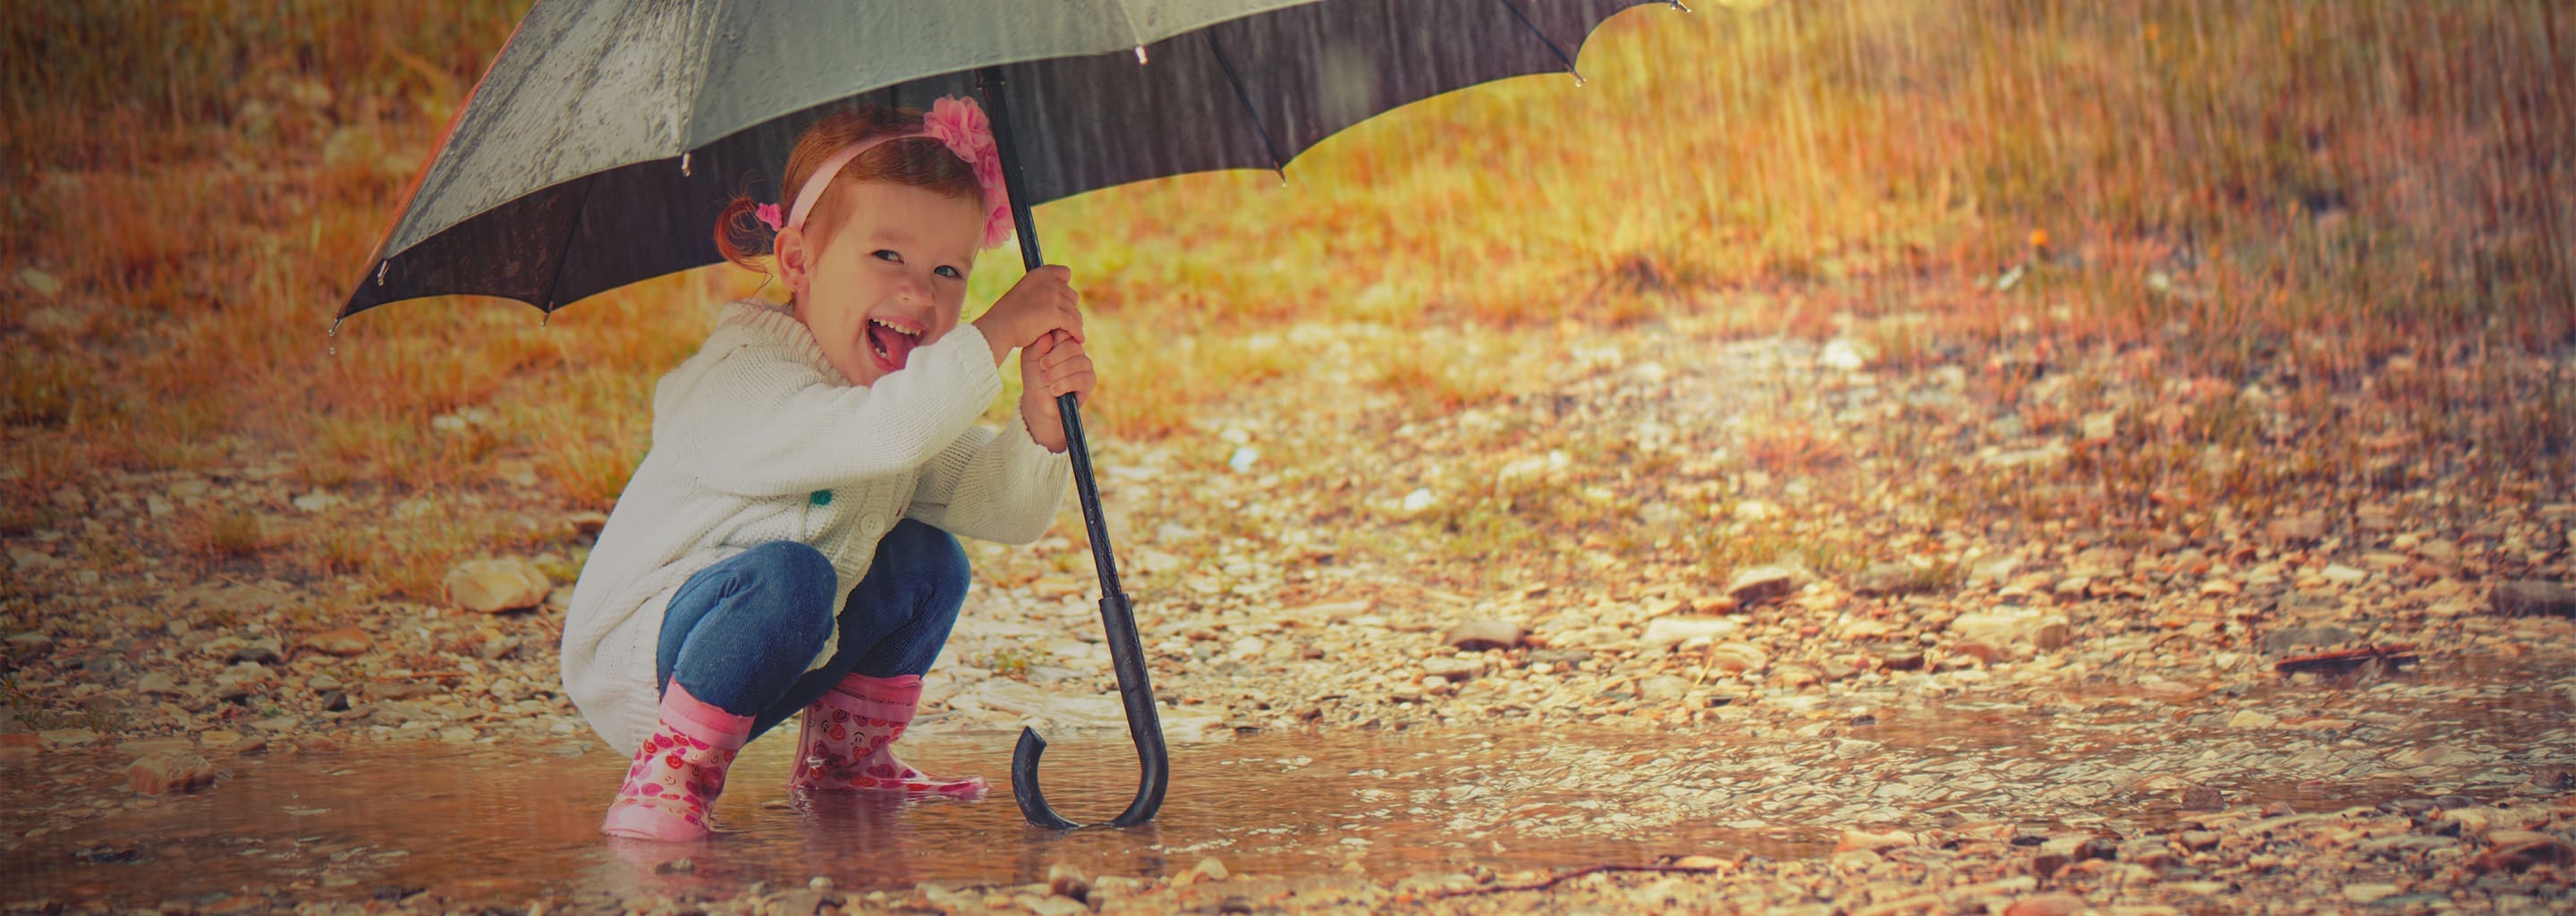 young girl playing in rain with umbrella